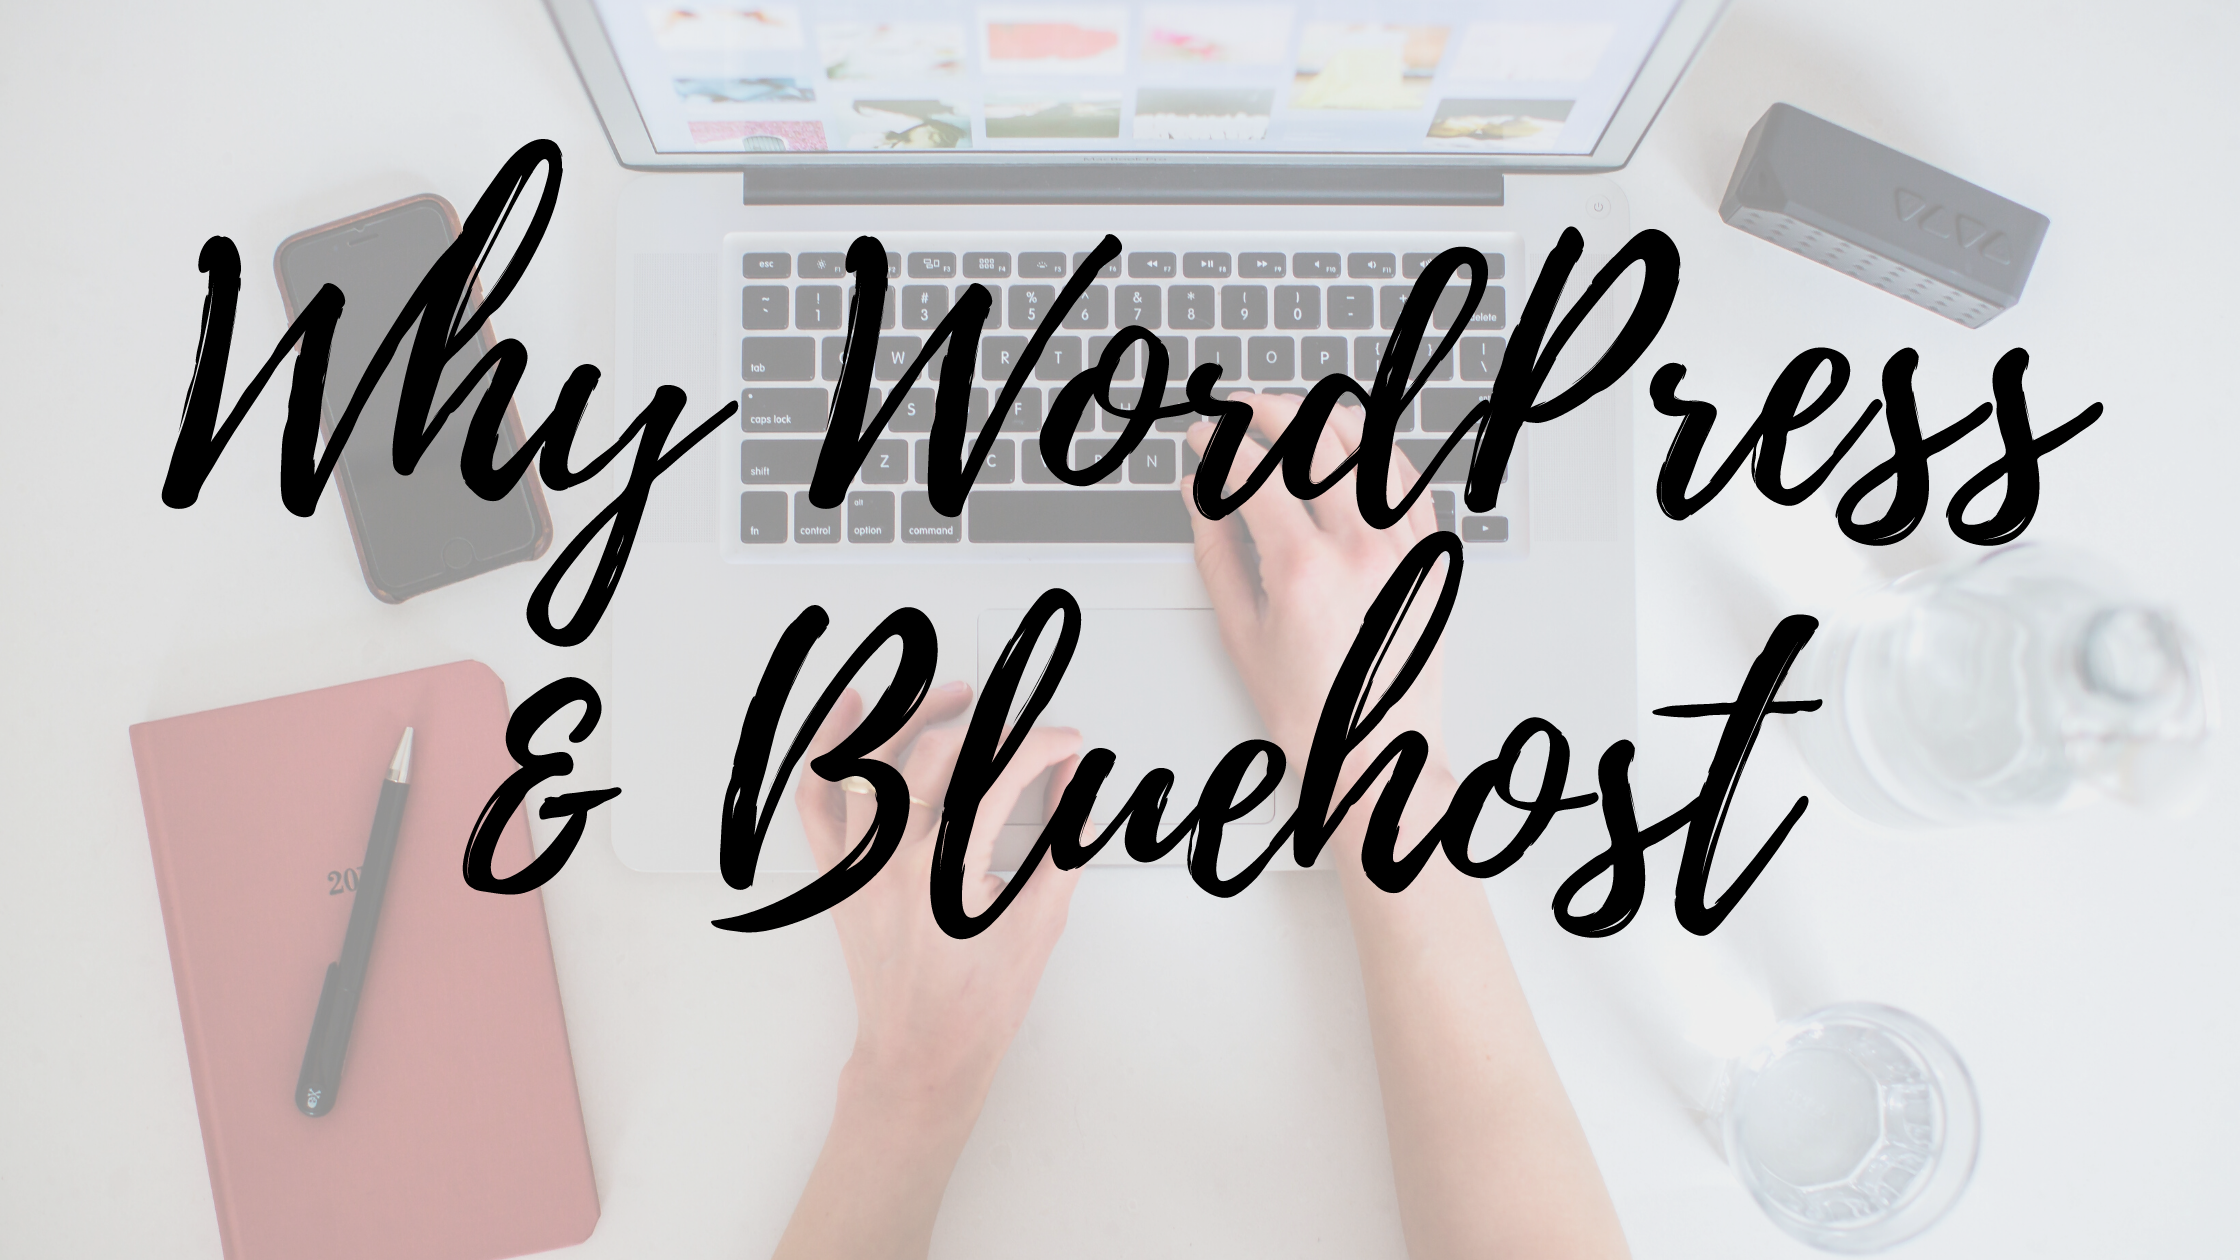 Why WordPress & Bluehost Should be Used By New Bloggers